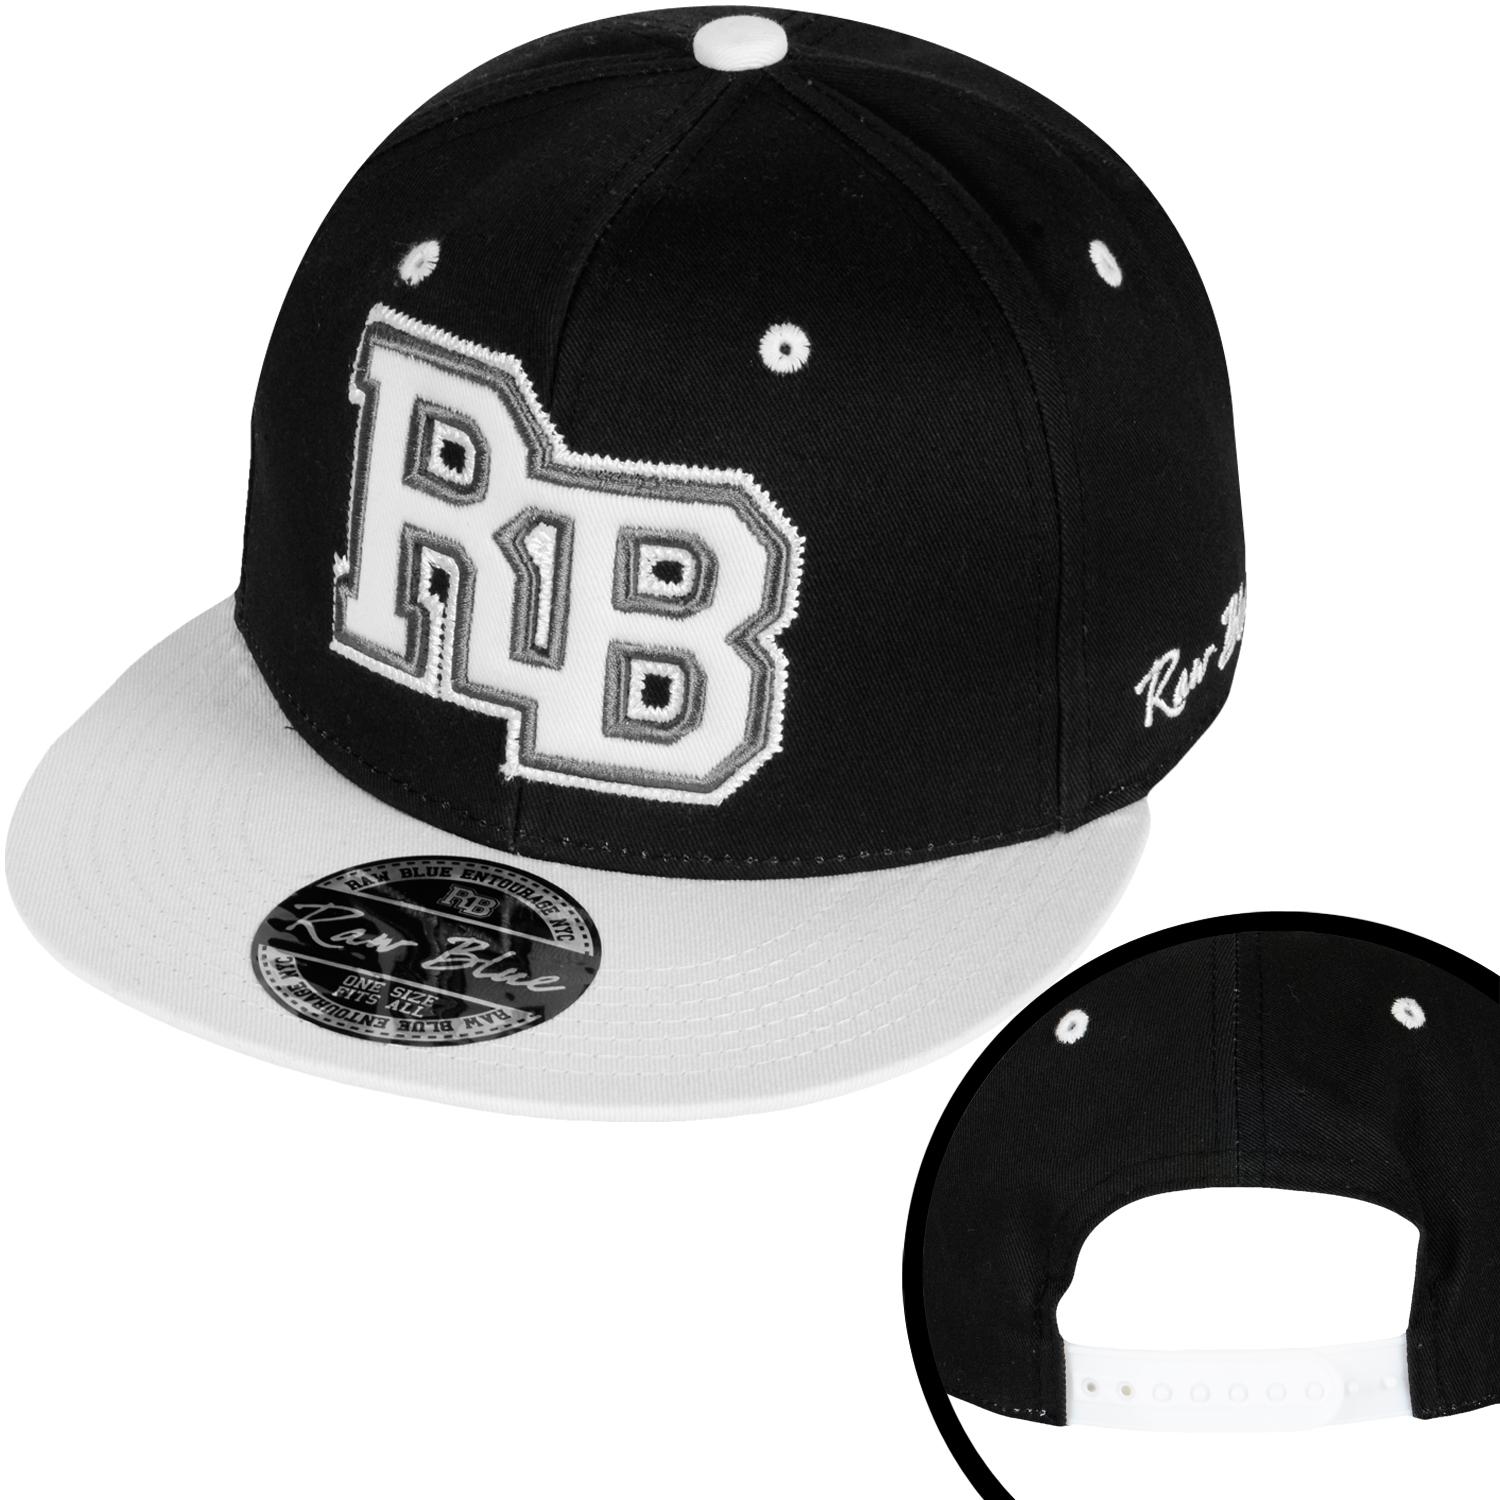 Foto Raw Blue Rb-letterpatch Hombres Snapback Cap Negro Blanco